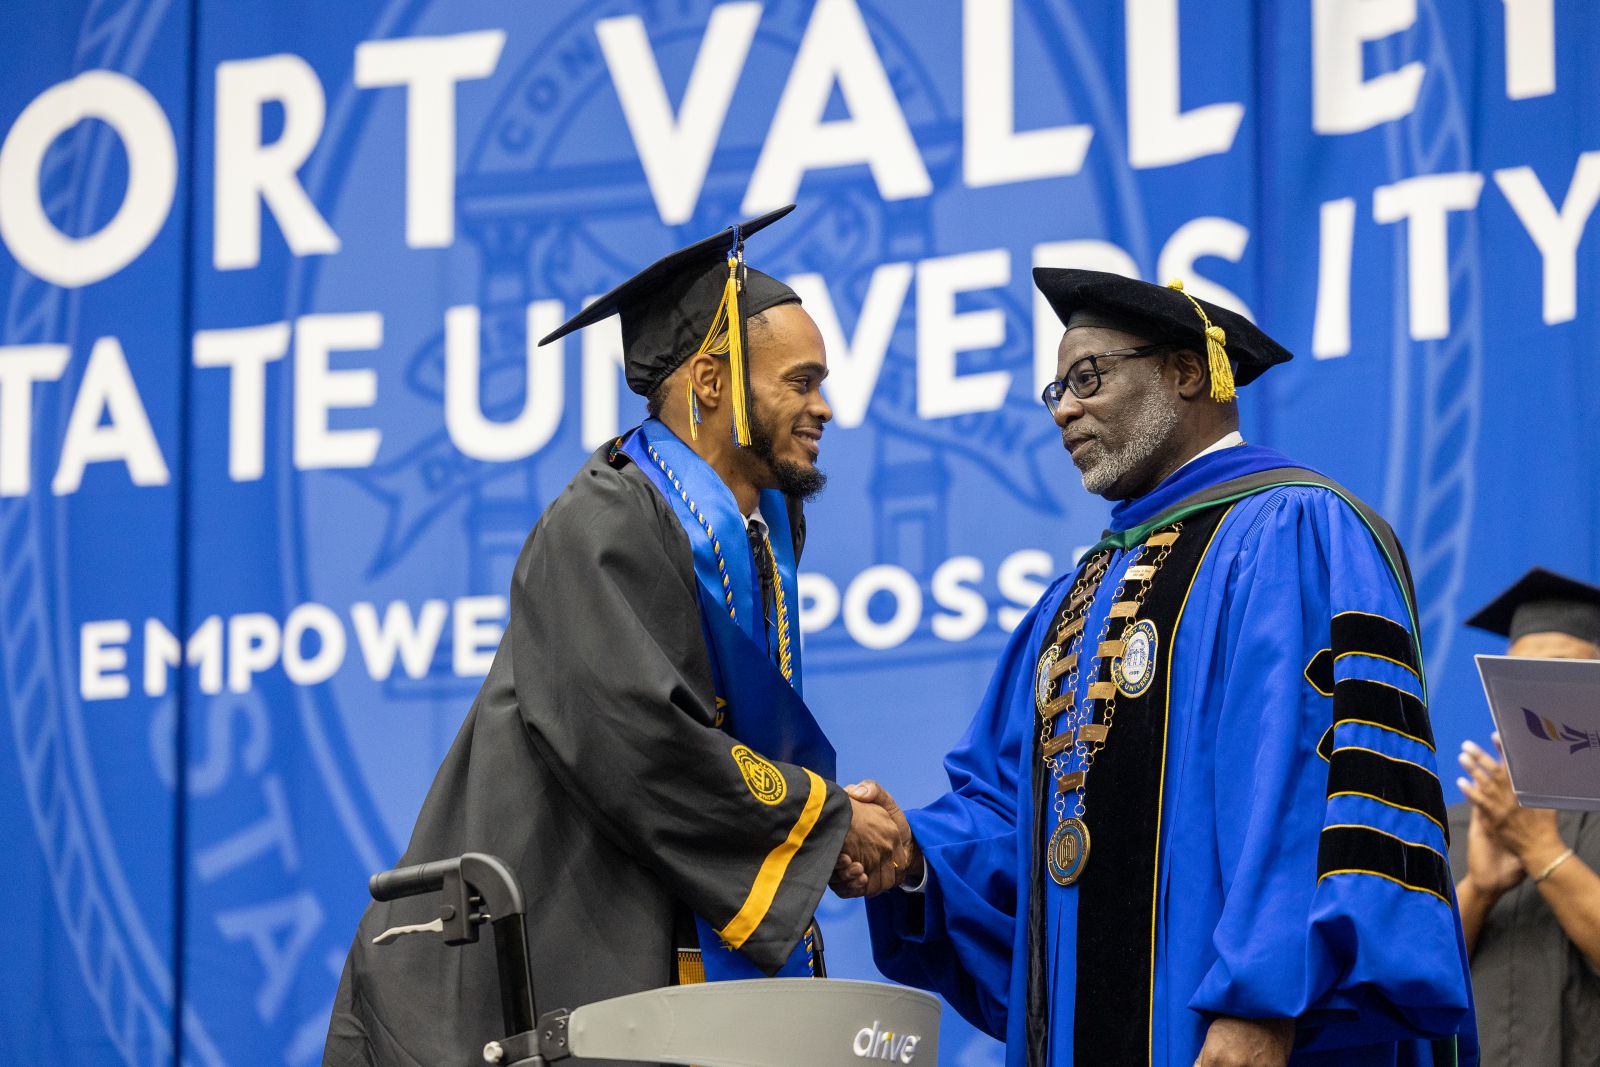 a graduate shakes the hand of the dean at a graduation ceremony